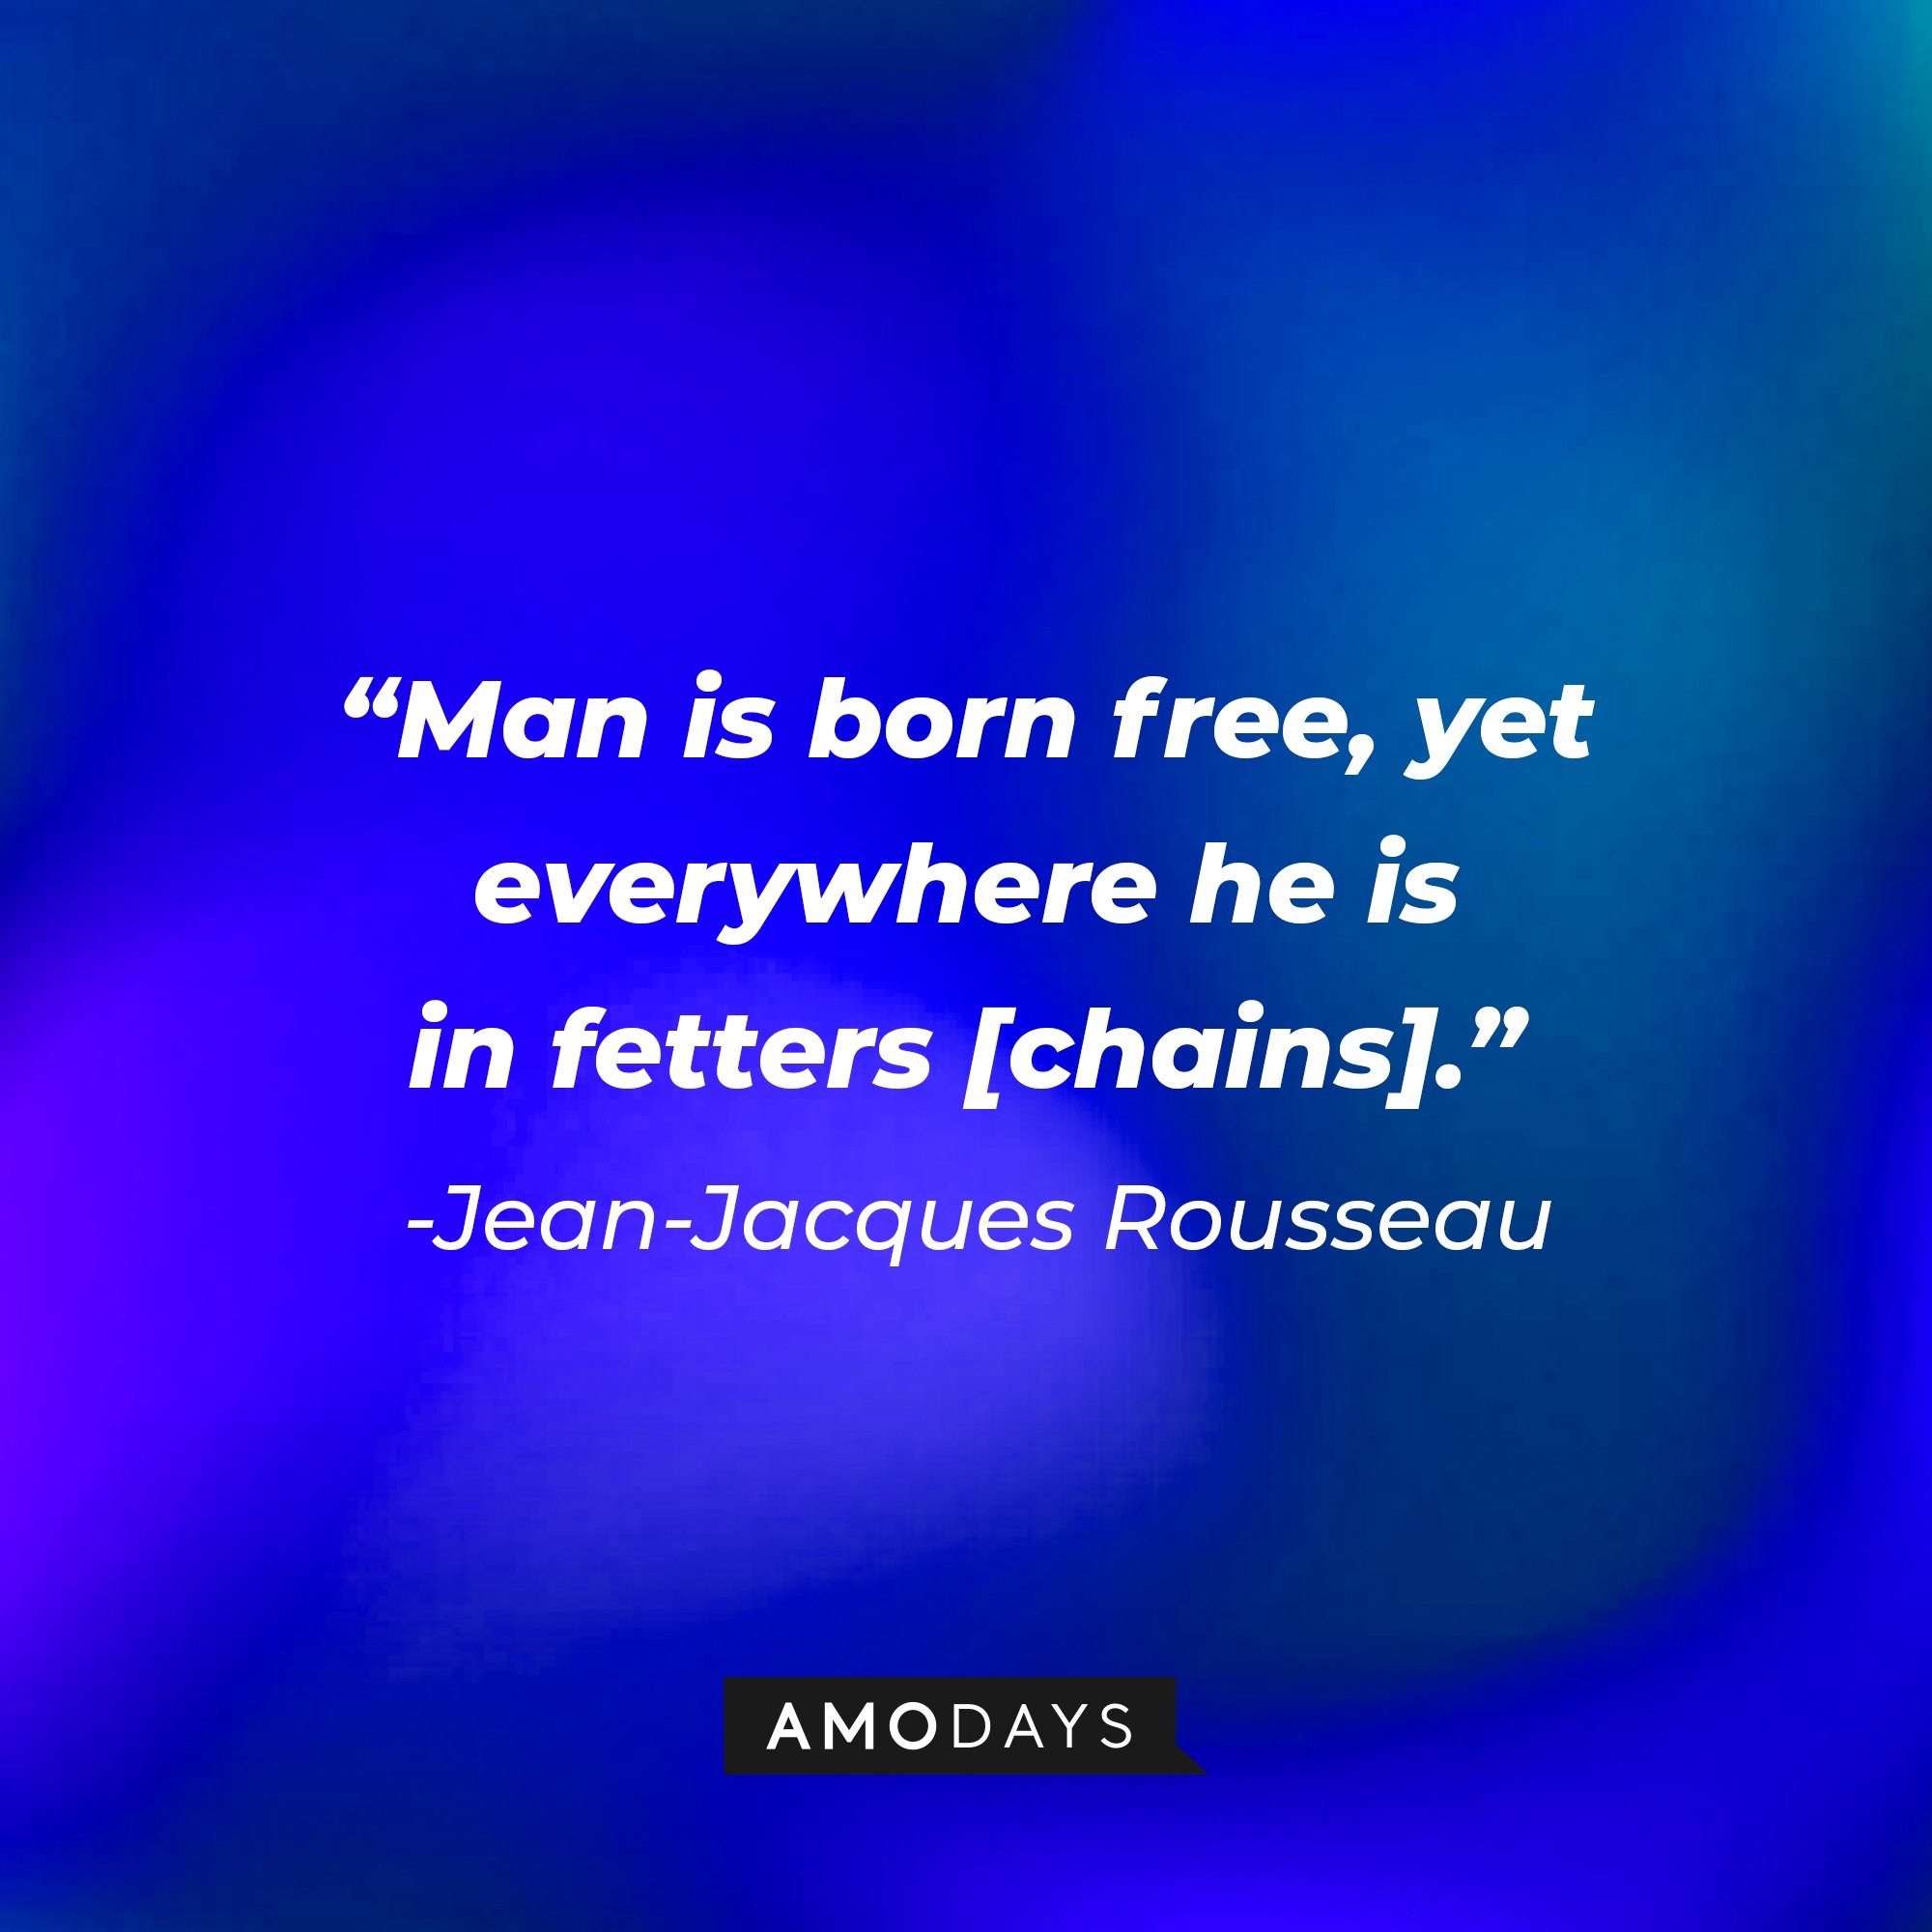  Jean-Jacques Rousseau’s quote: "Man is born free, yet everywhere he is in fetters [chains]." | Image: AmoDays